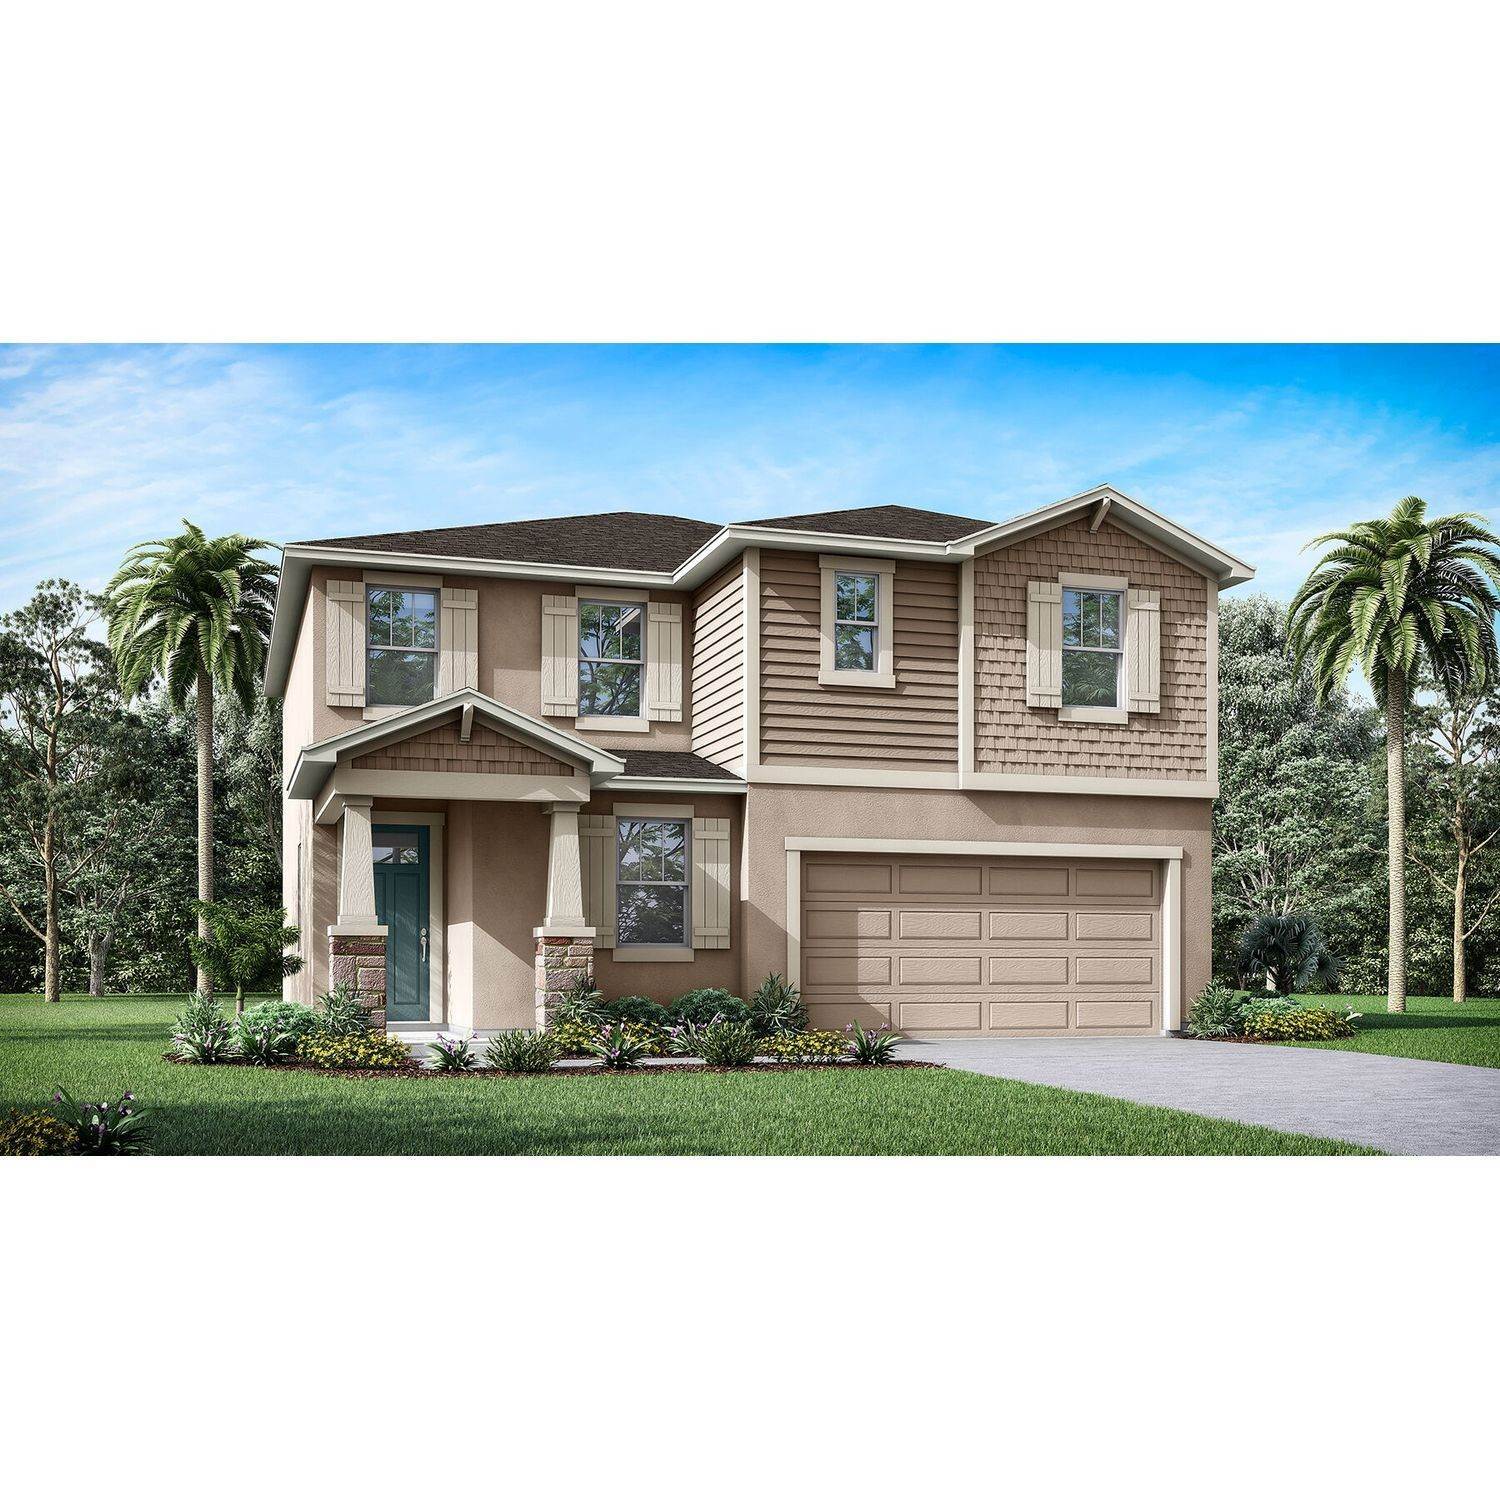 Single Family for Sale at Clermont, FL 34711